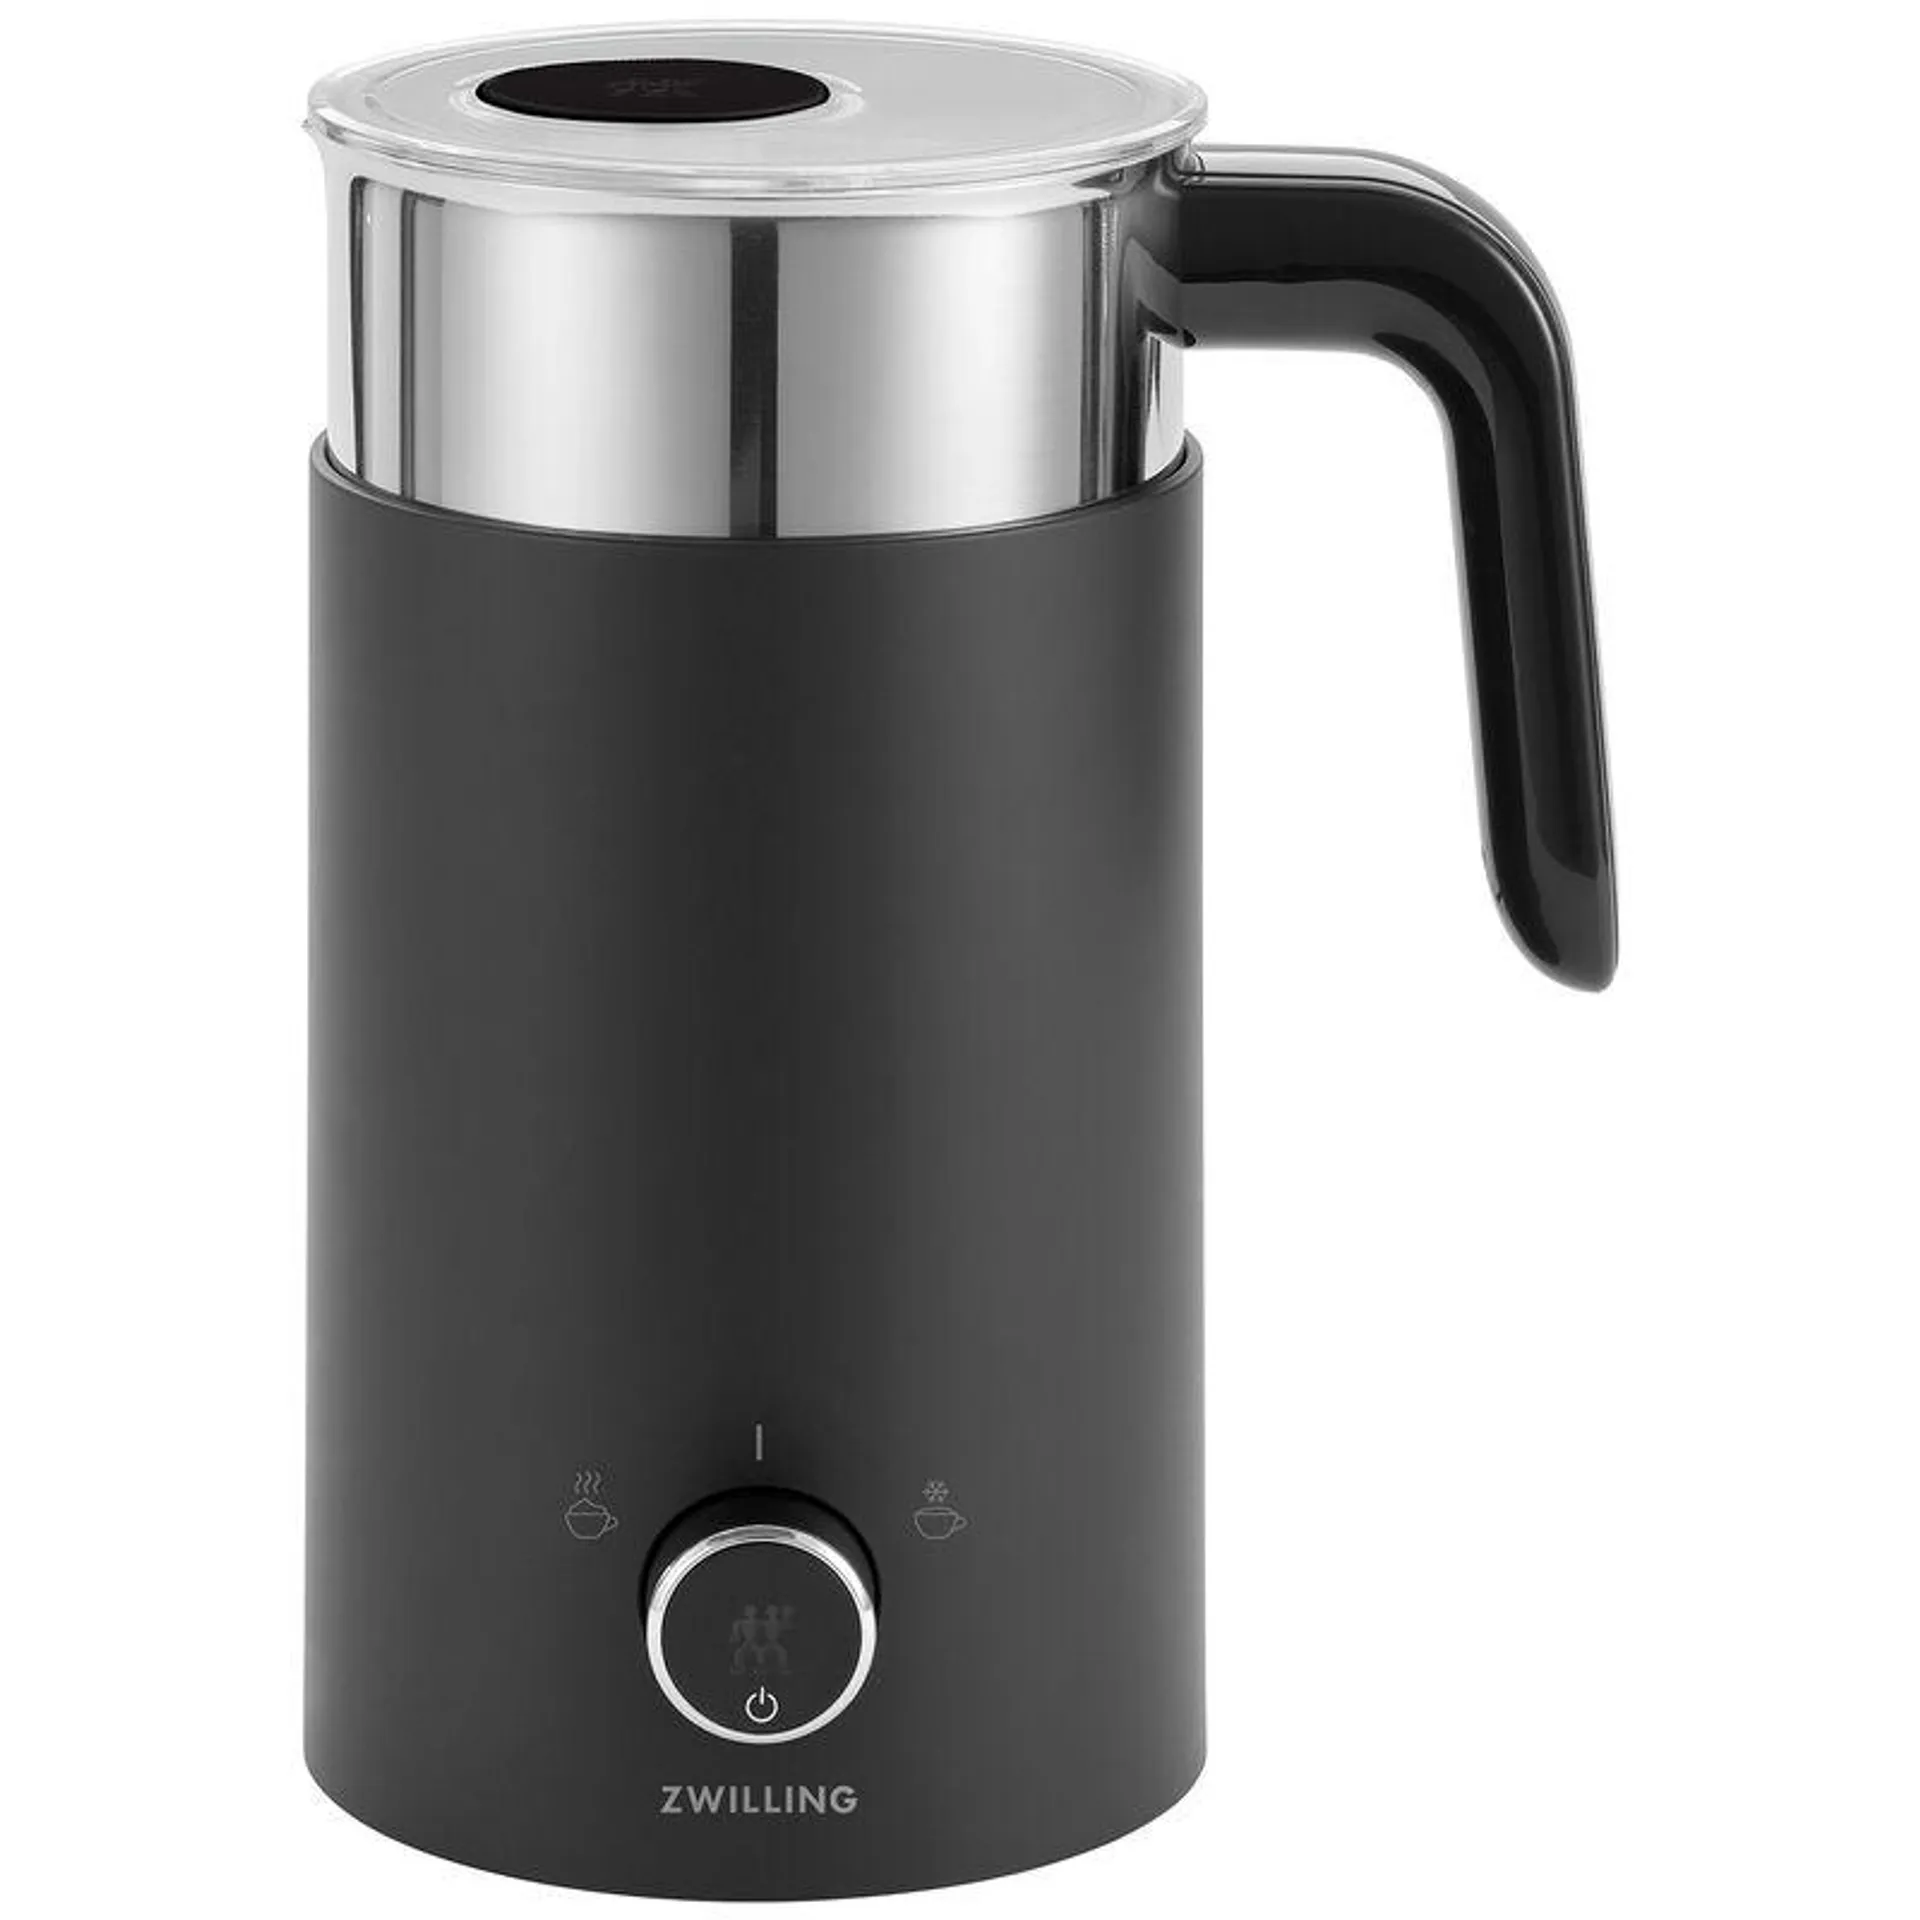 Zwilling Enfinigy Milk Frother - Black